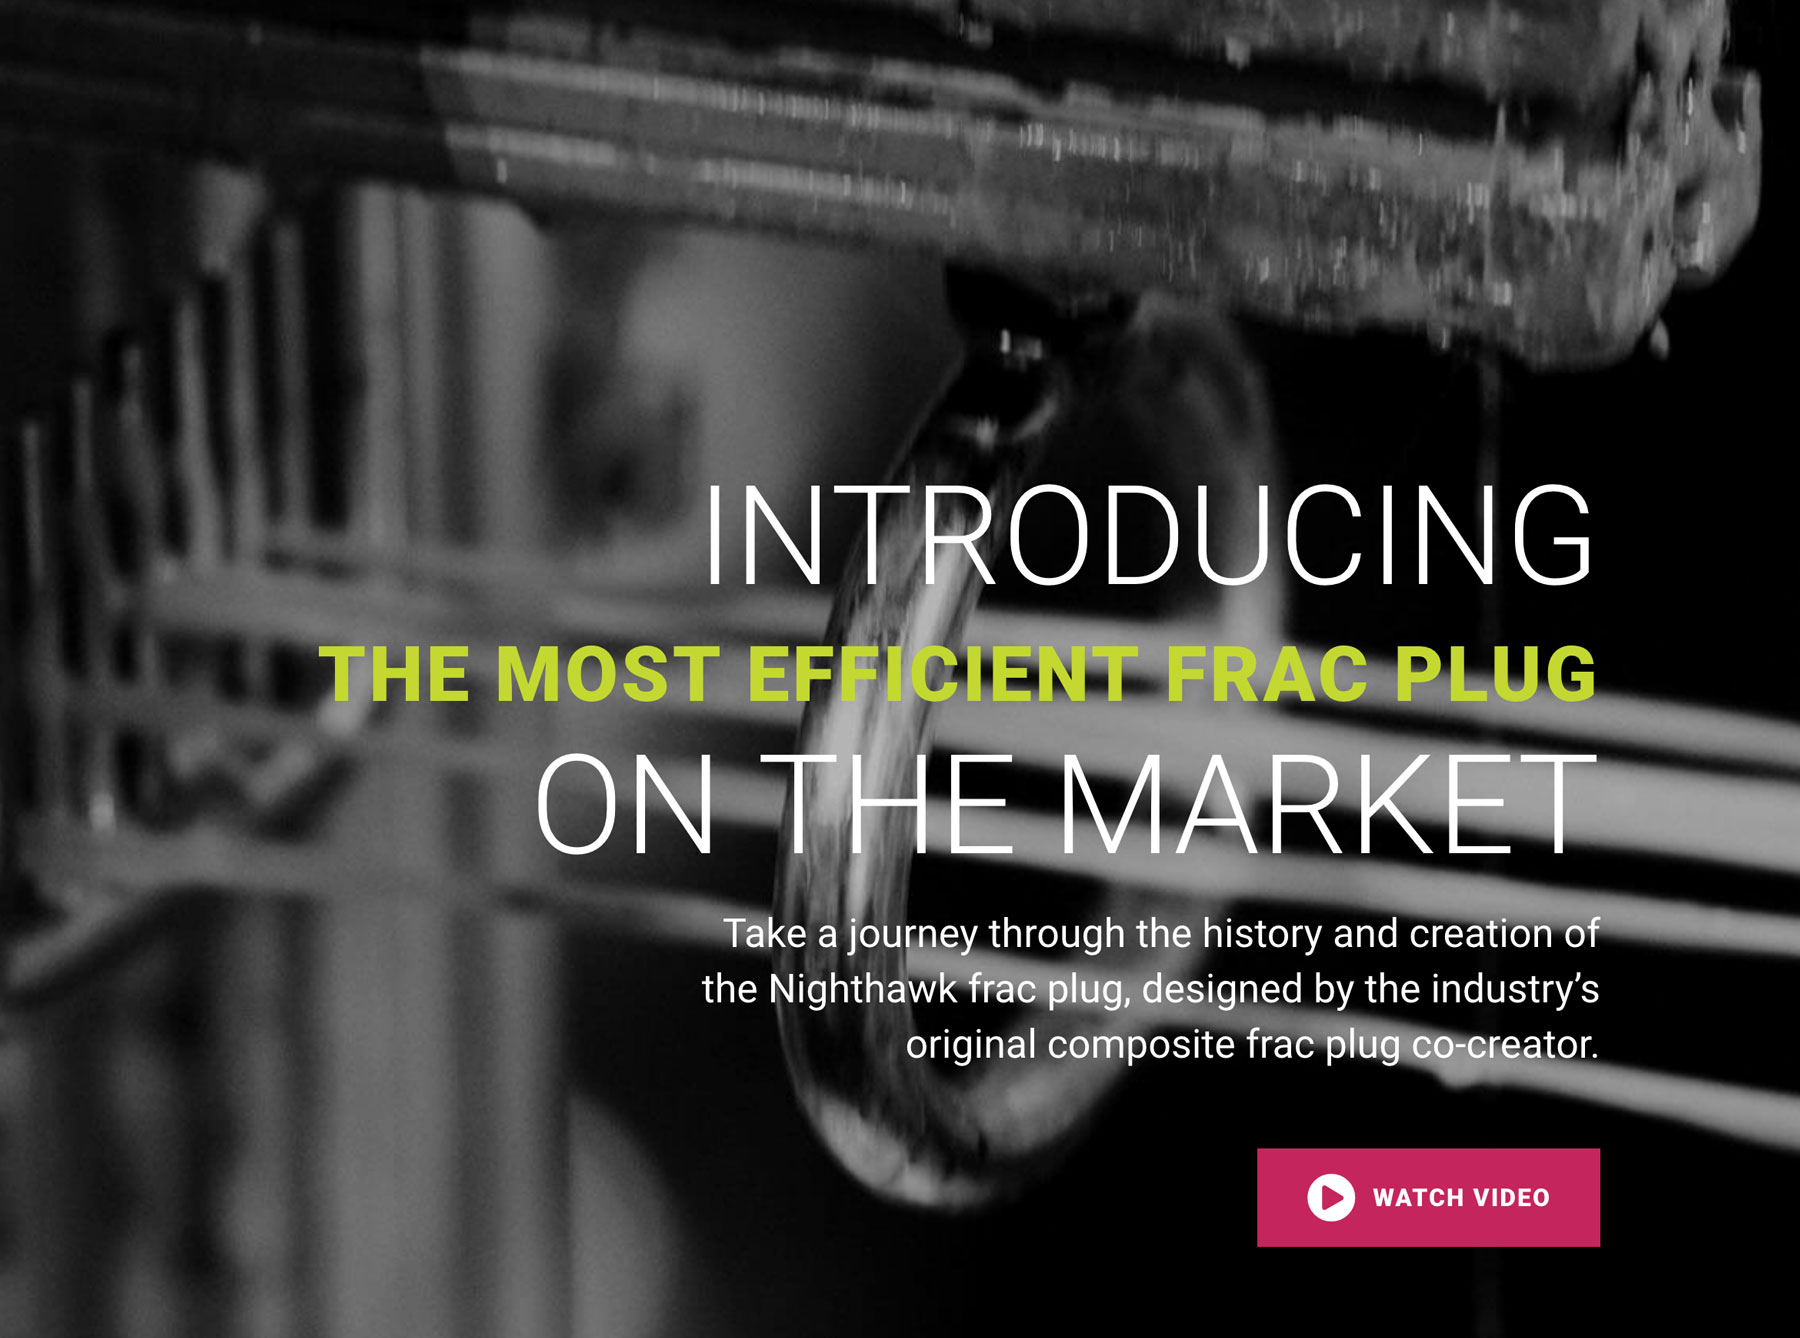 Introducing the most efficient frac plug on the market